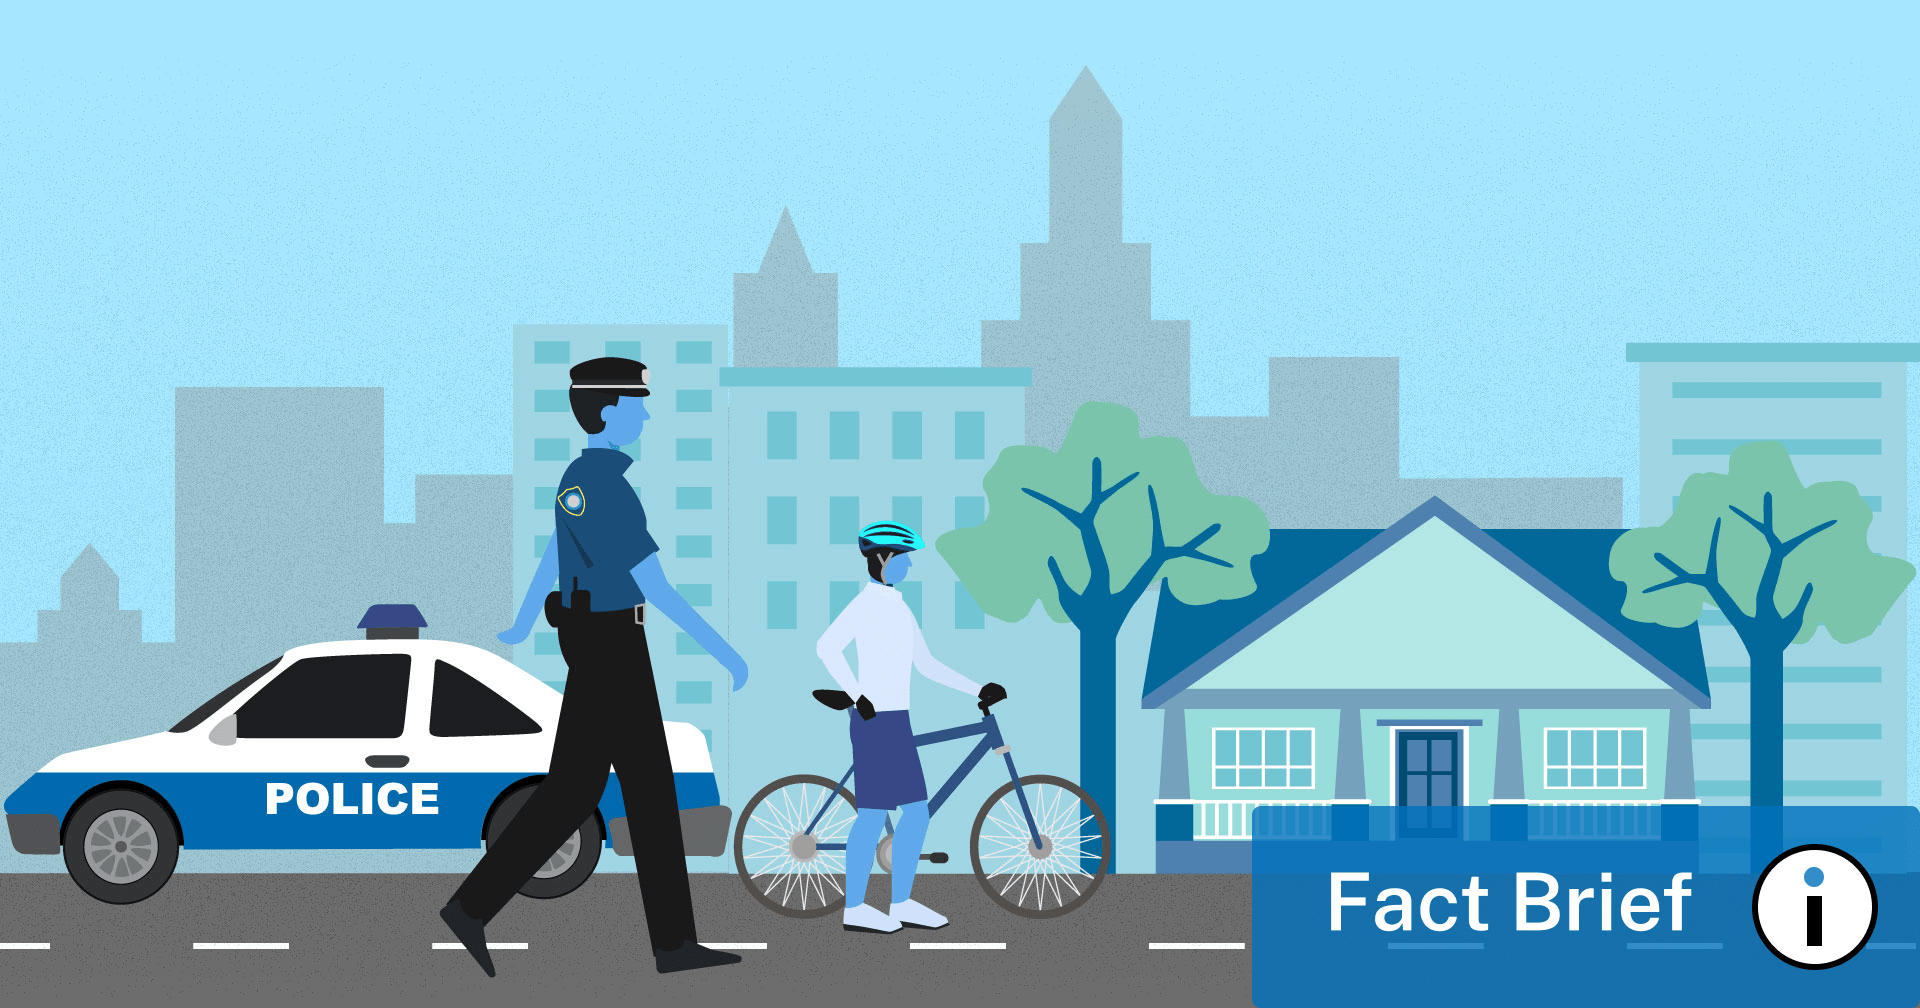 An illustration of a police officer walking down a city street.